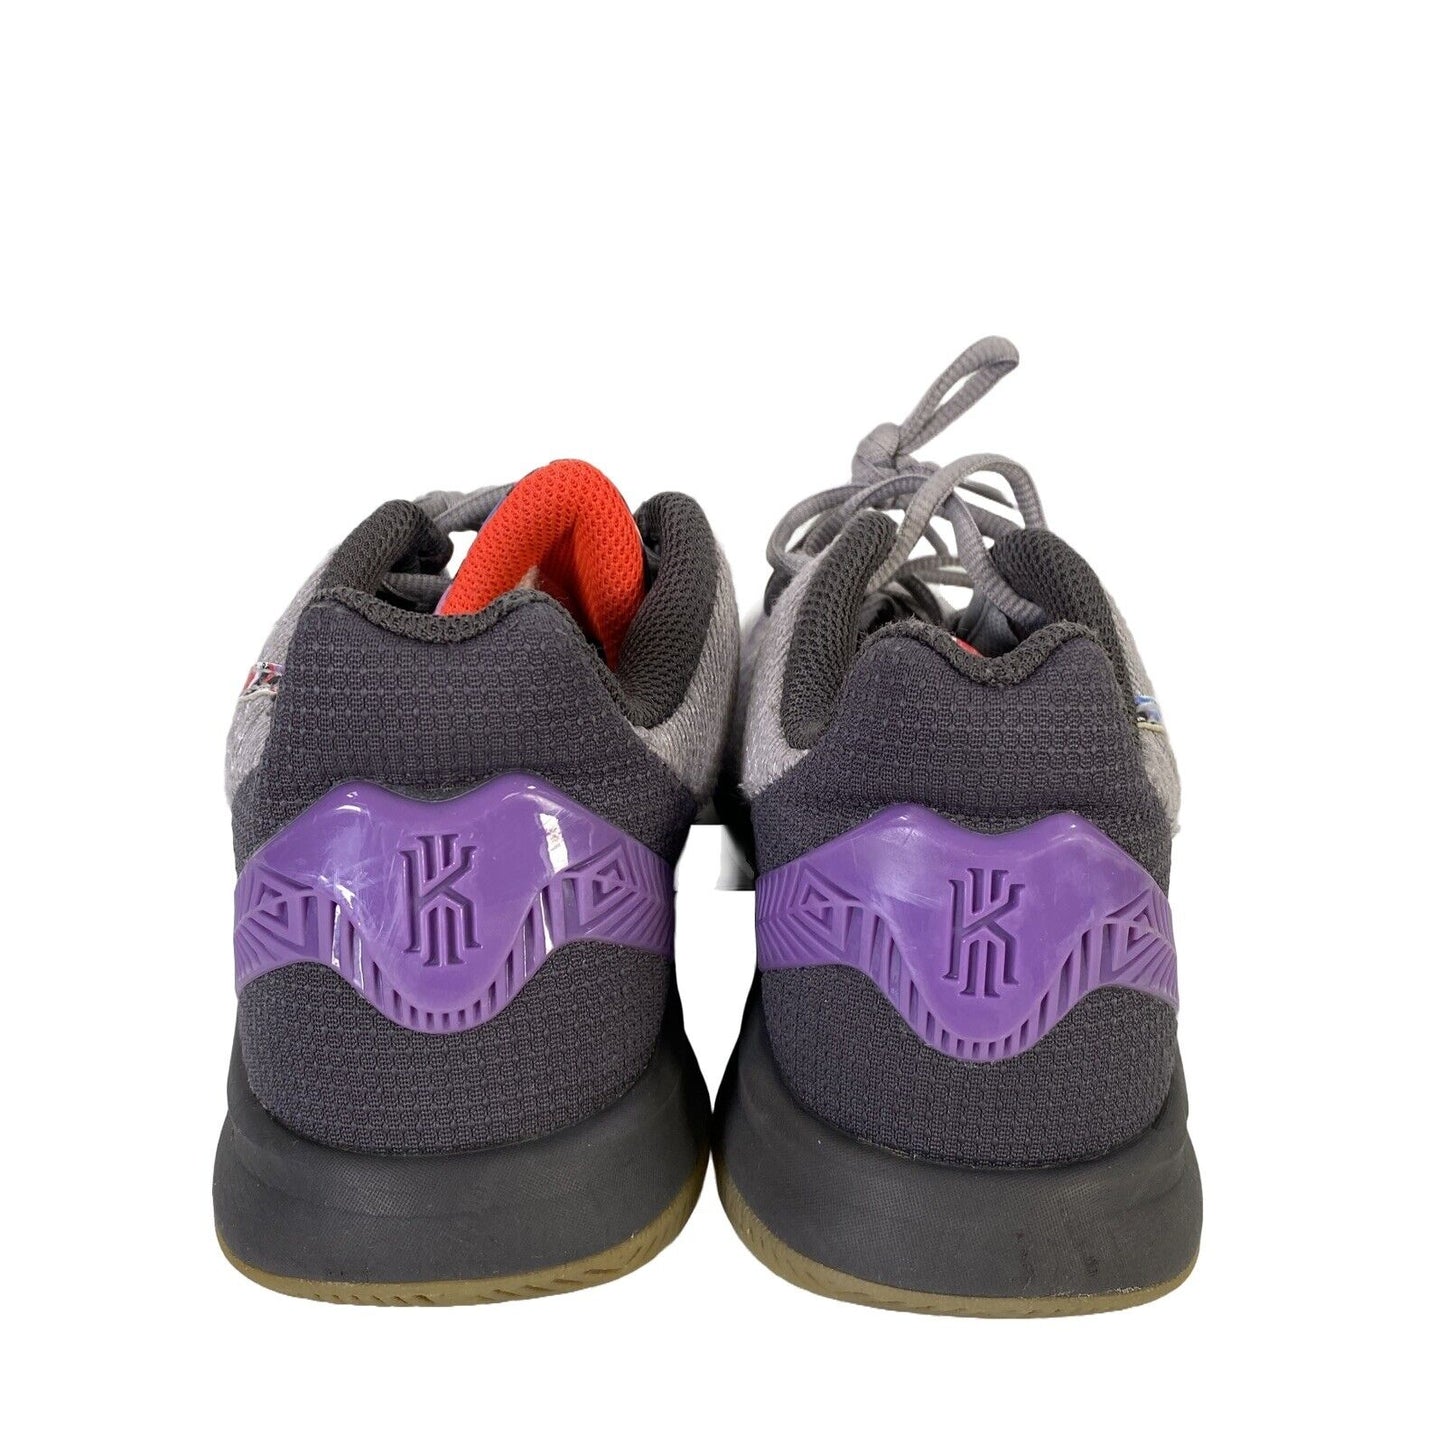 Nike Boys Gray/Purple Kyrie Flytrap Lace Up Athletic Shoes - 6 Youth